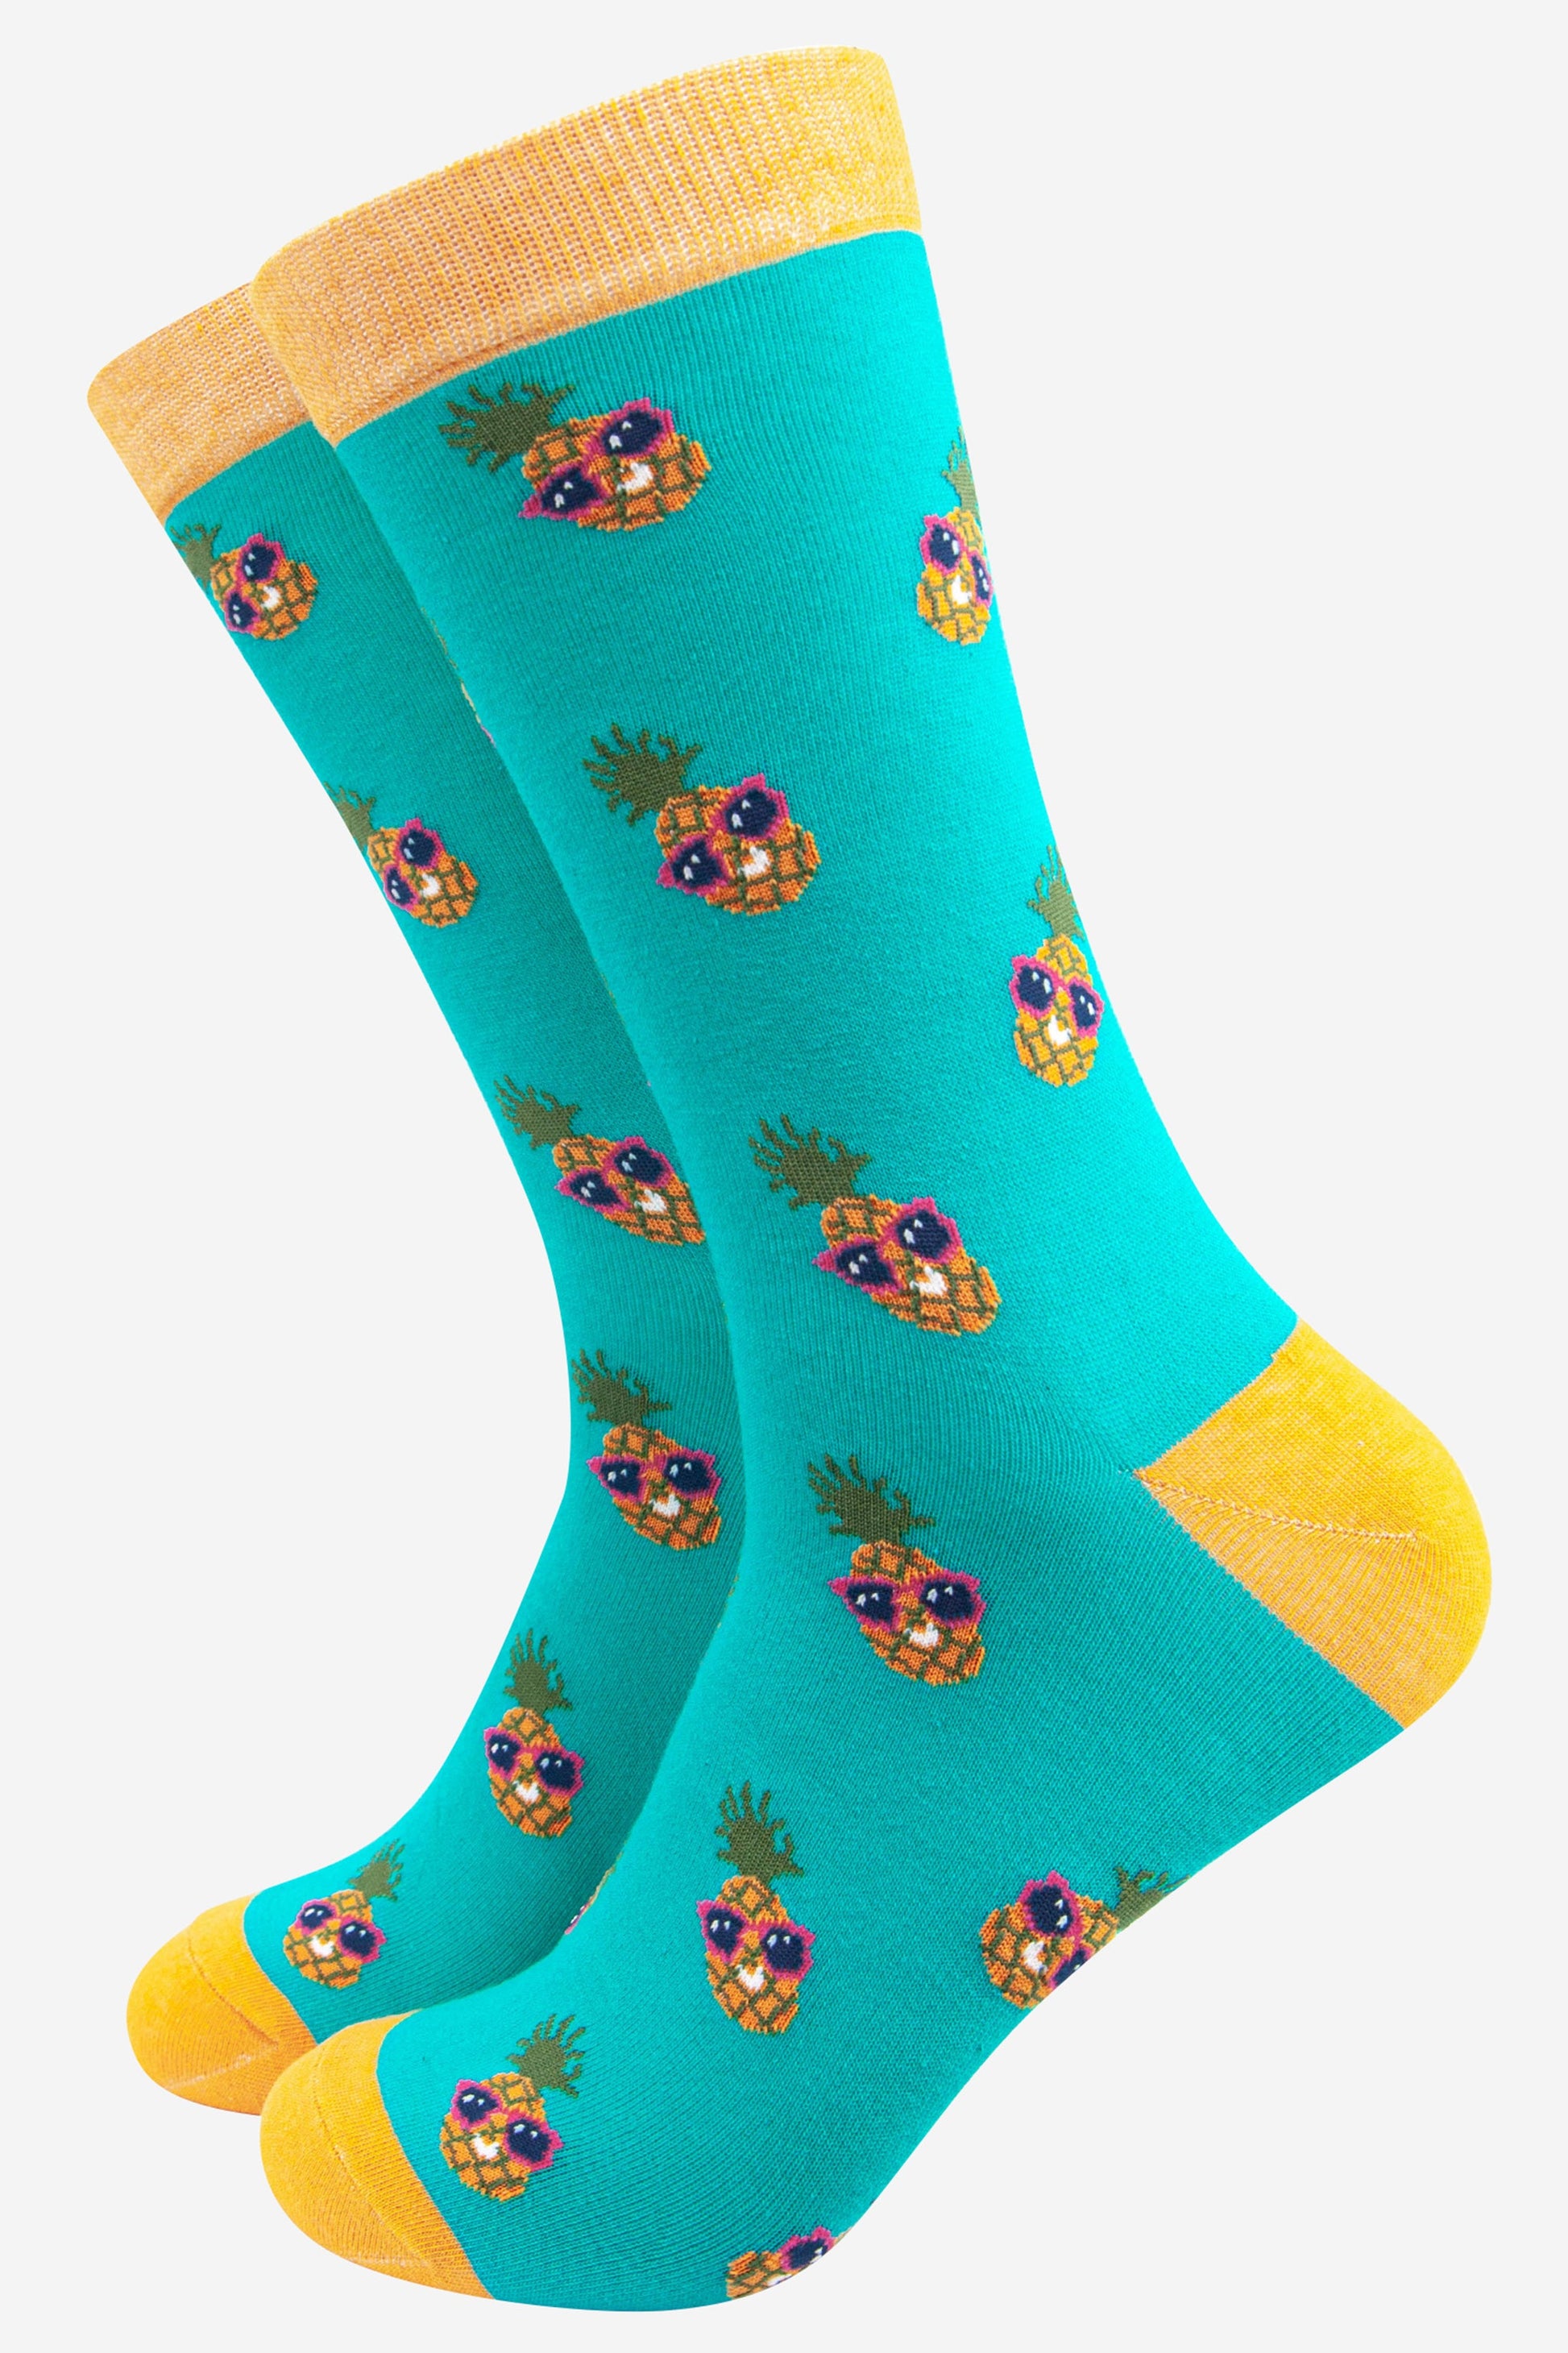 turquoise and yellow bamboo socks with an all over pineapple print, the pineapples are wearing pink sunglasses